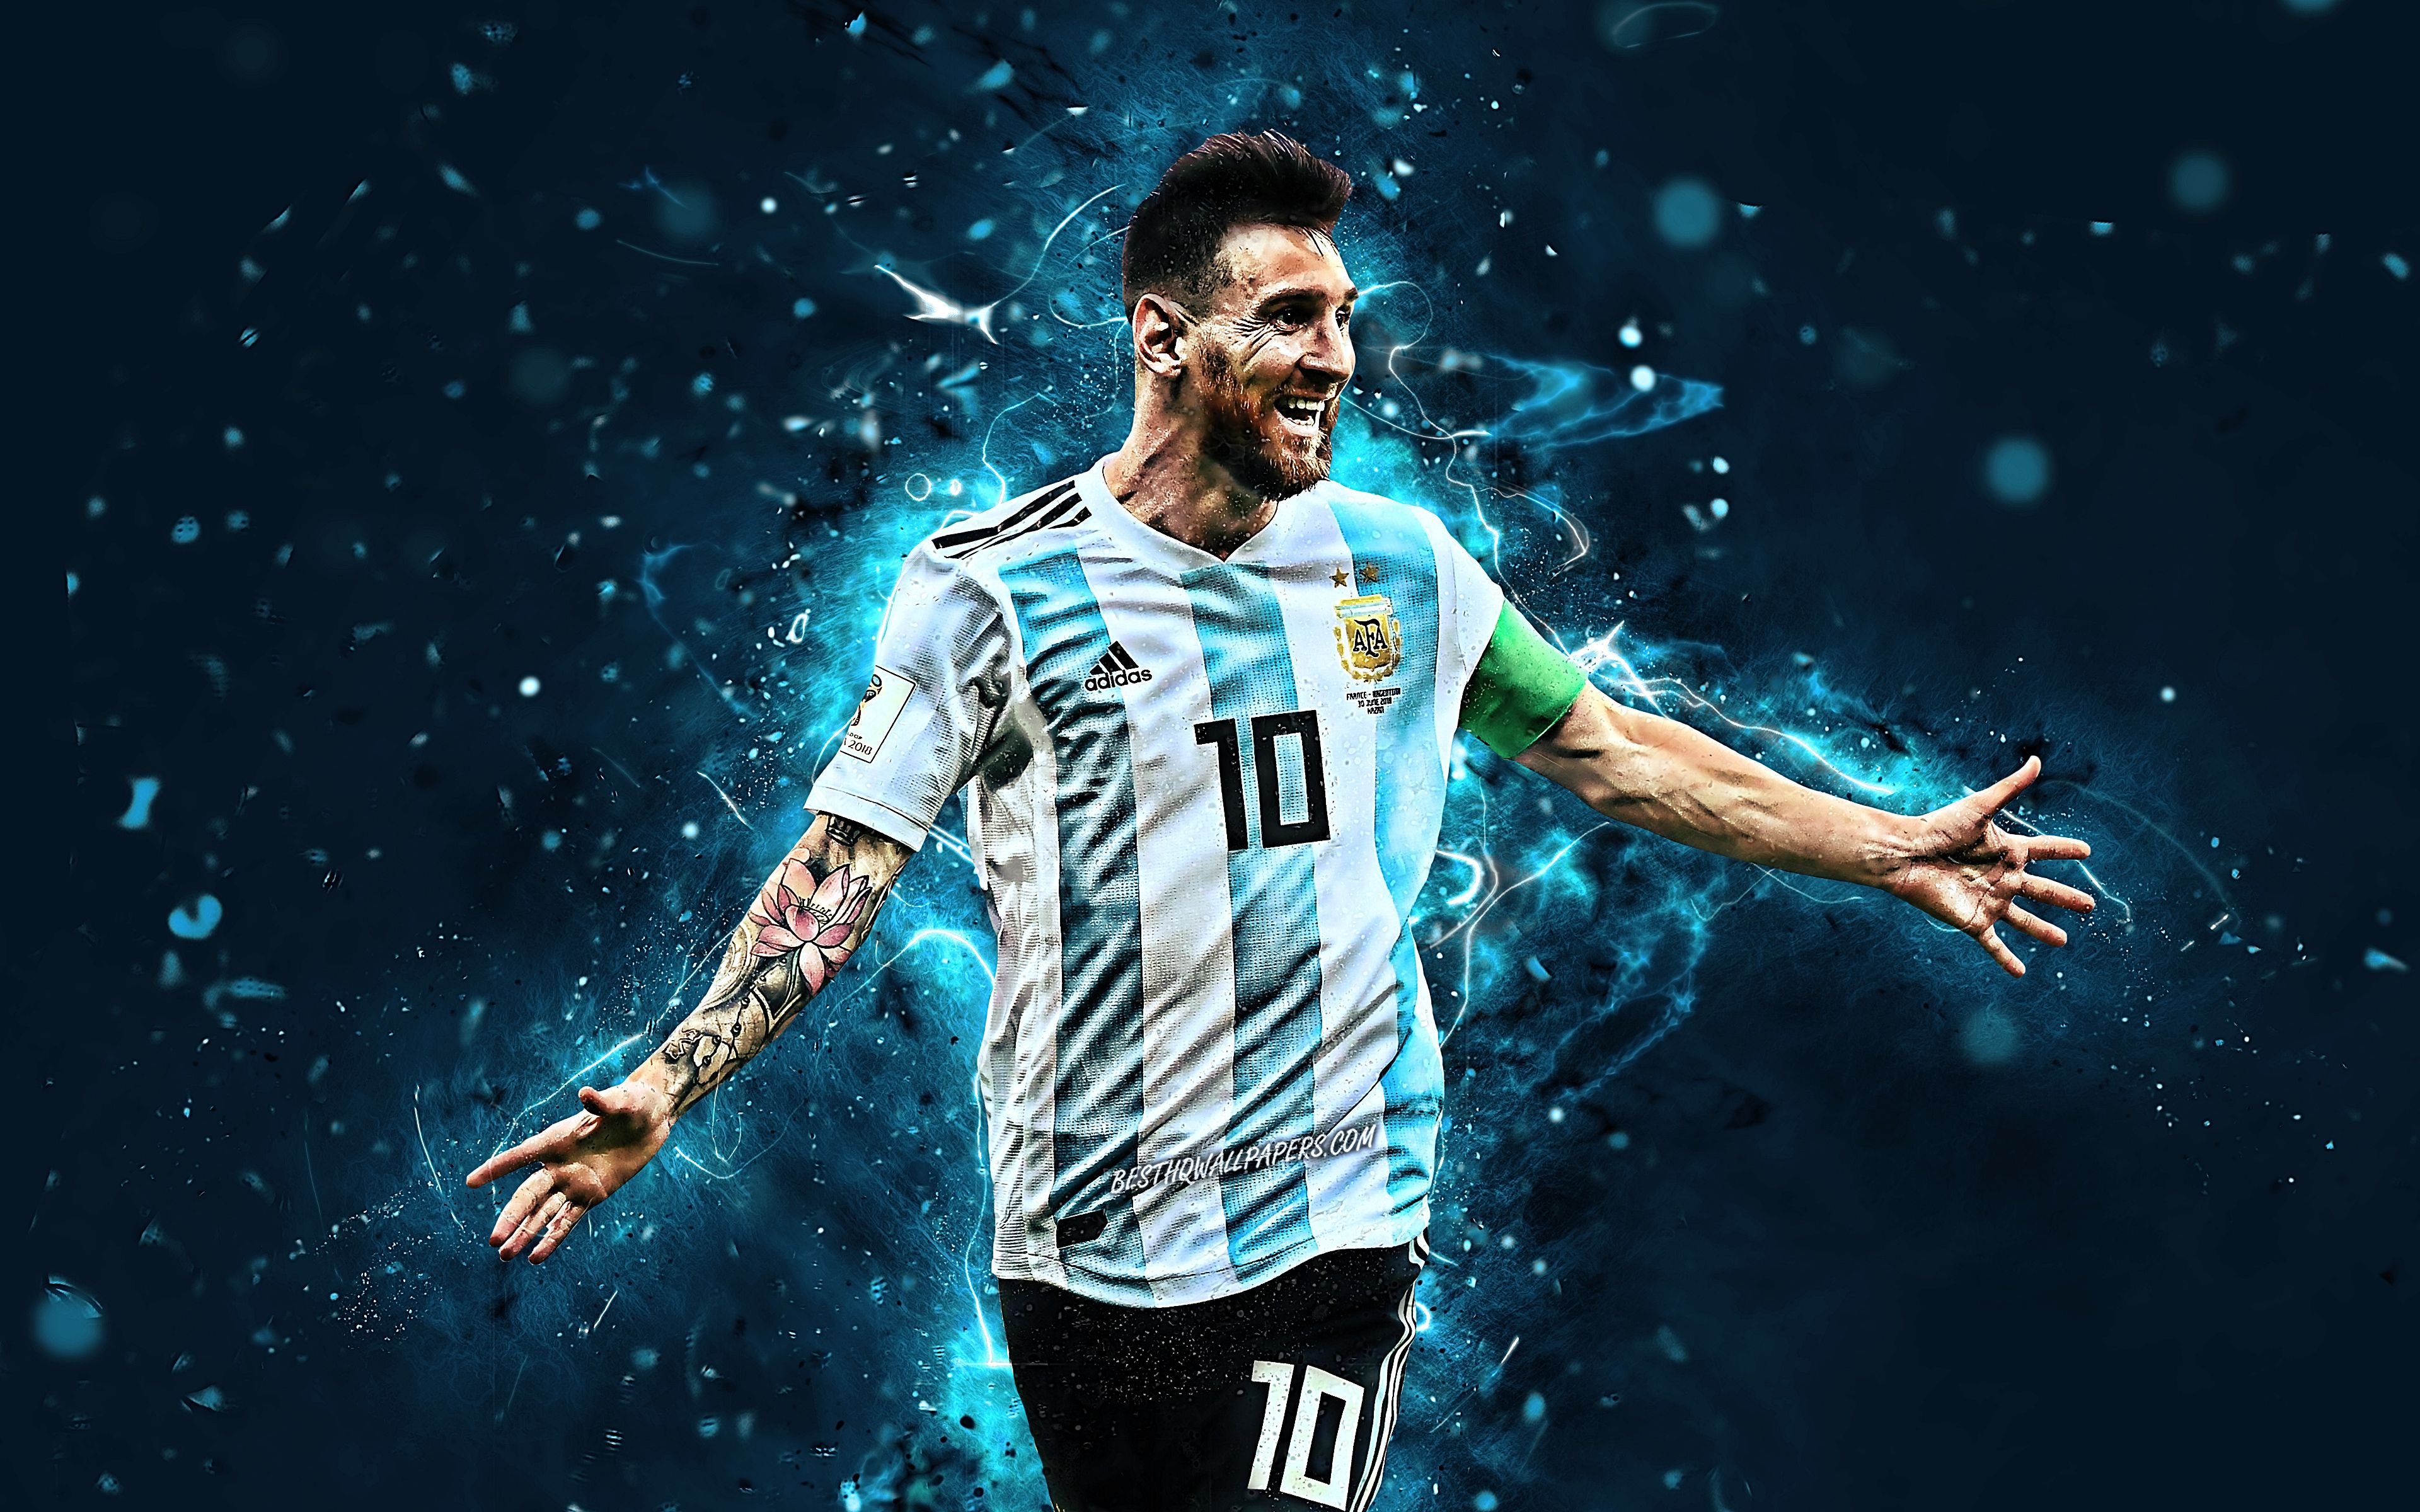 Download wallpaper 4k, Lionel Messi, joy, Argentina national football team, goal, football stars, Leo Messi, soccer, Messi, abstract art, Argentine National Team, footballers, Messi 4k for desktop with resolution 3840x2400. High Quality